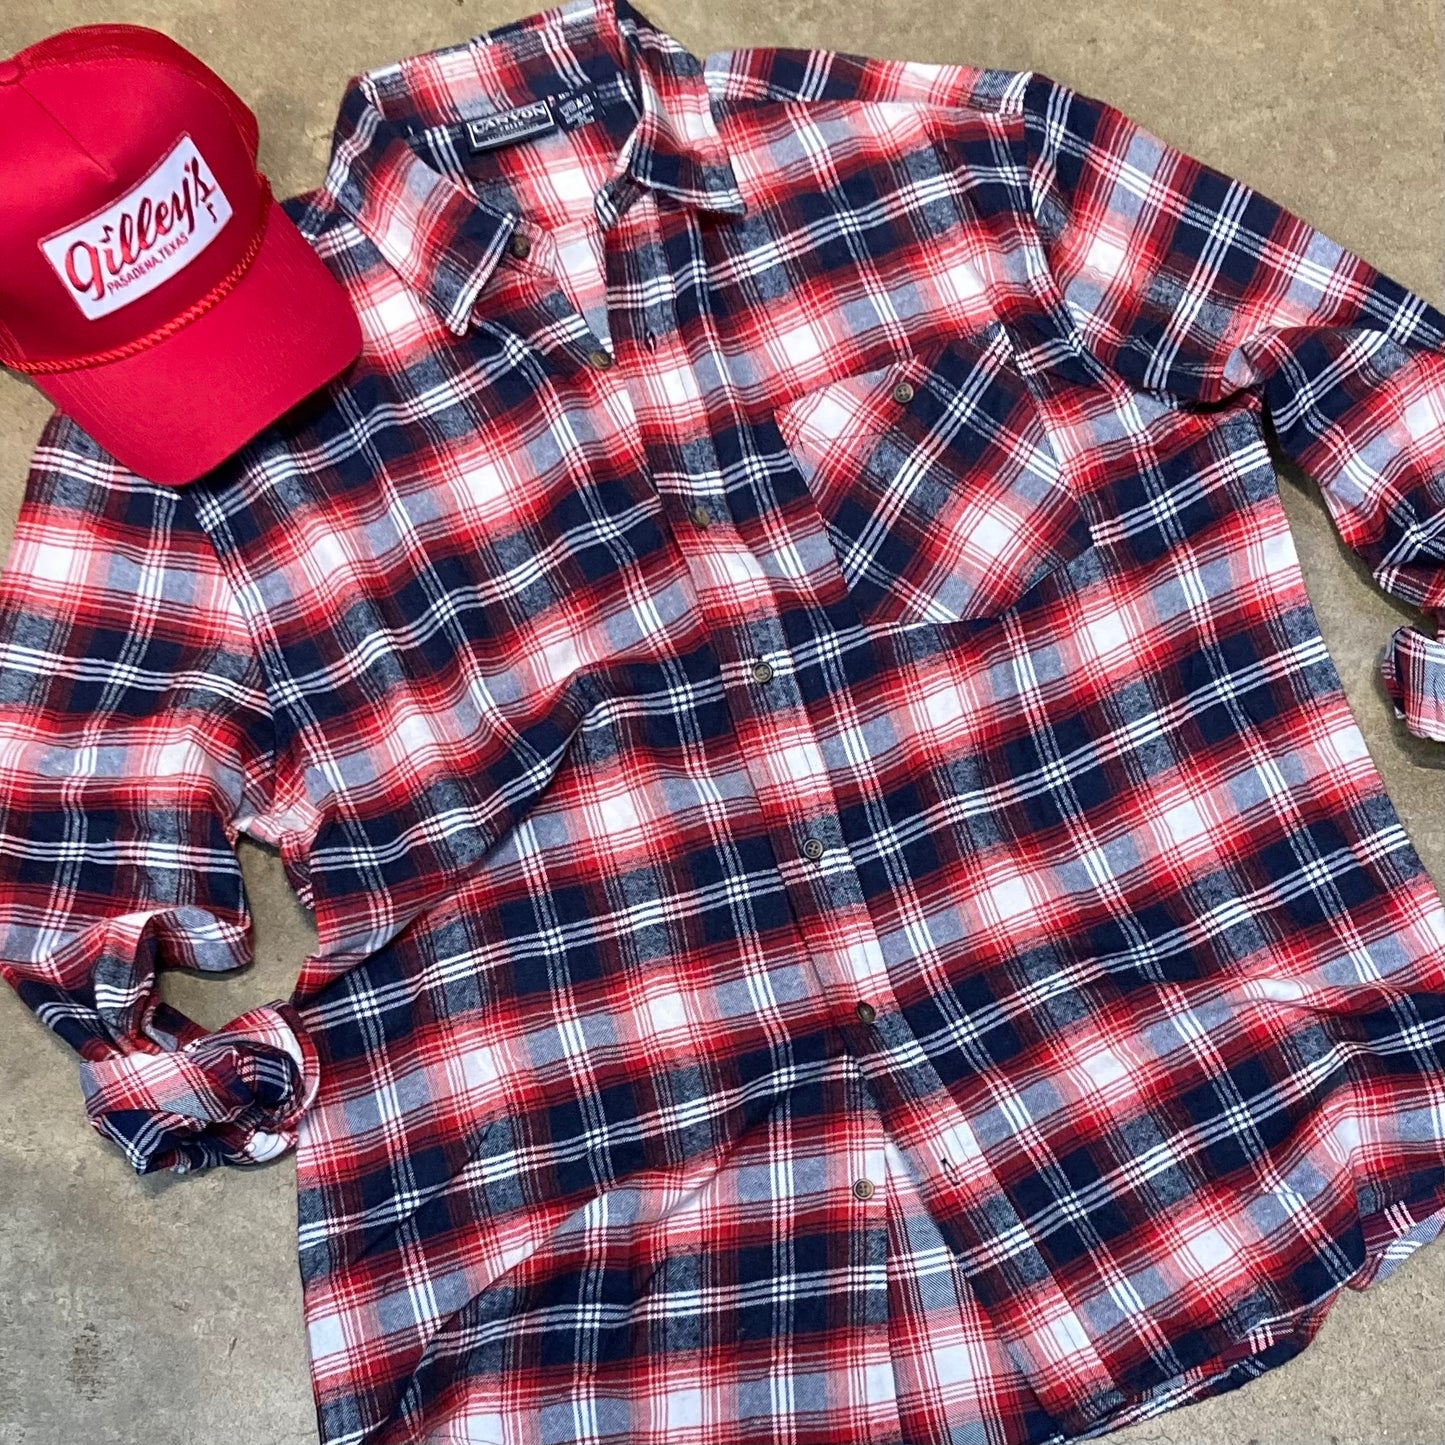 Gilley's Sequin Classic Plaid Flannel